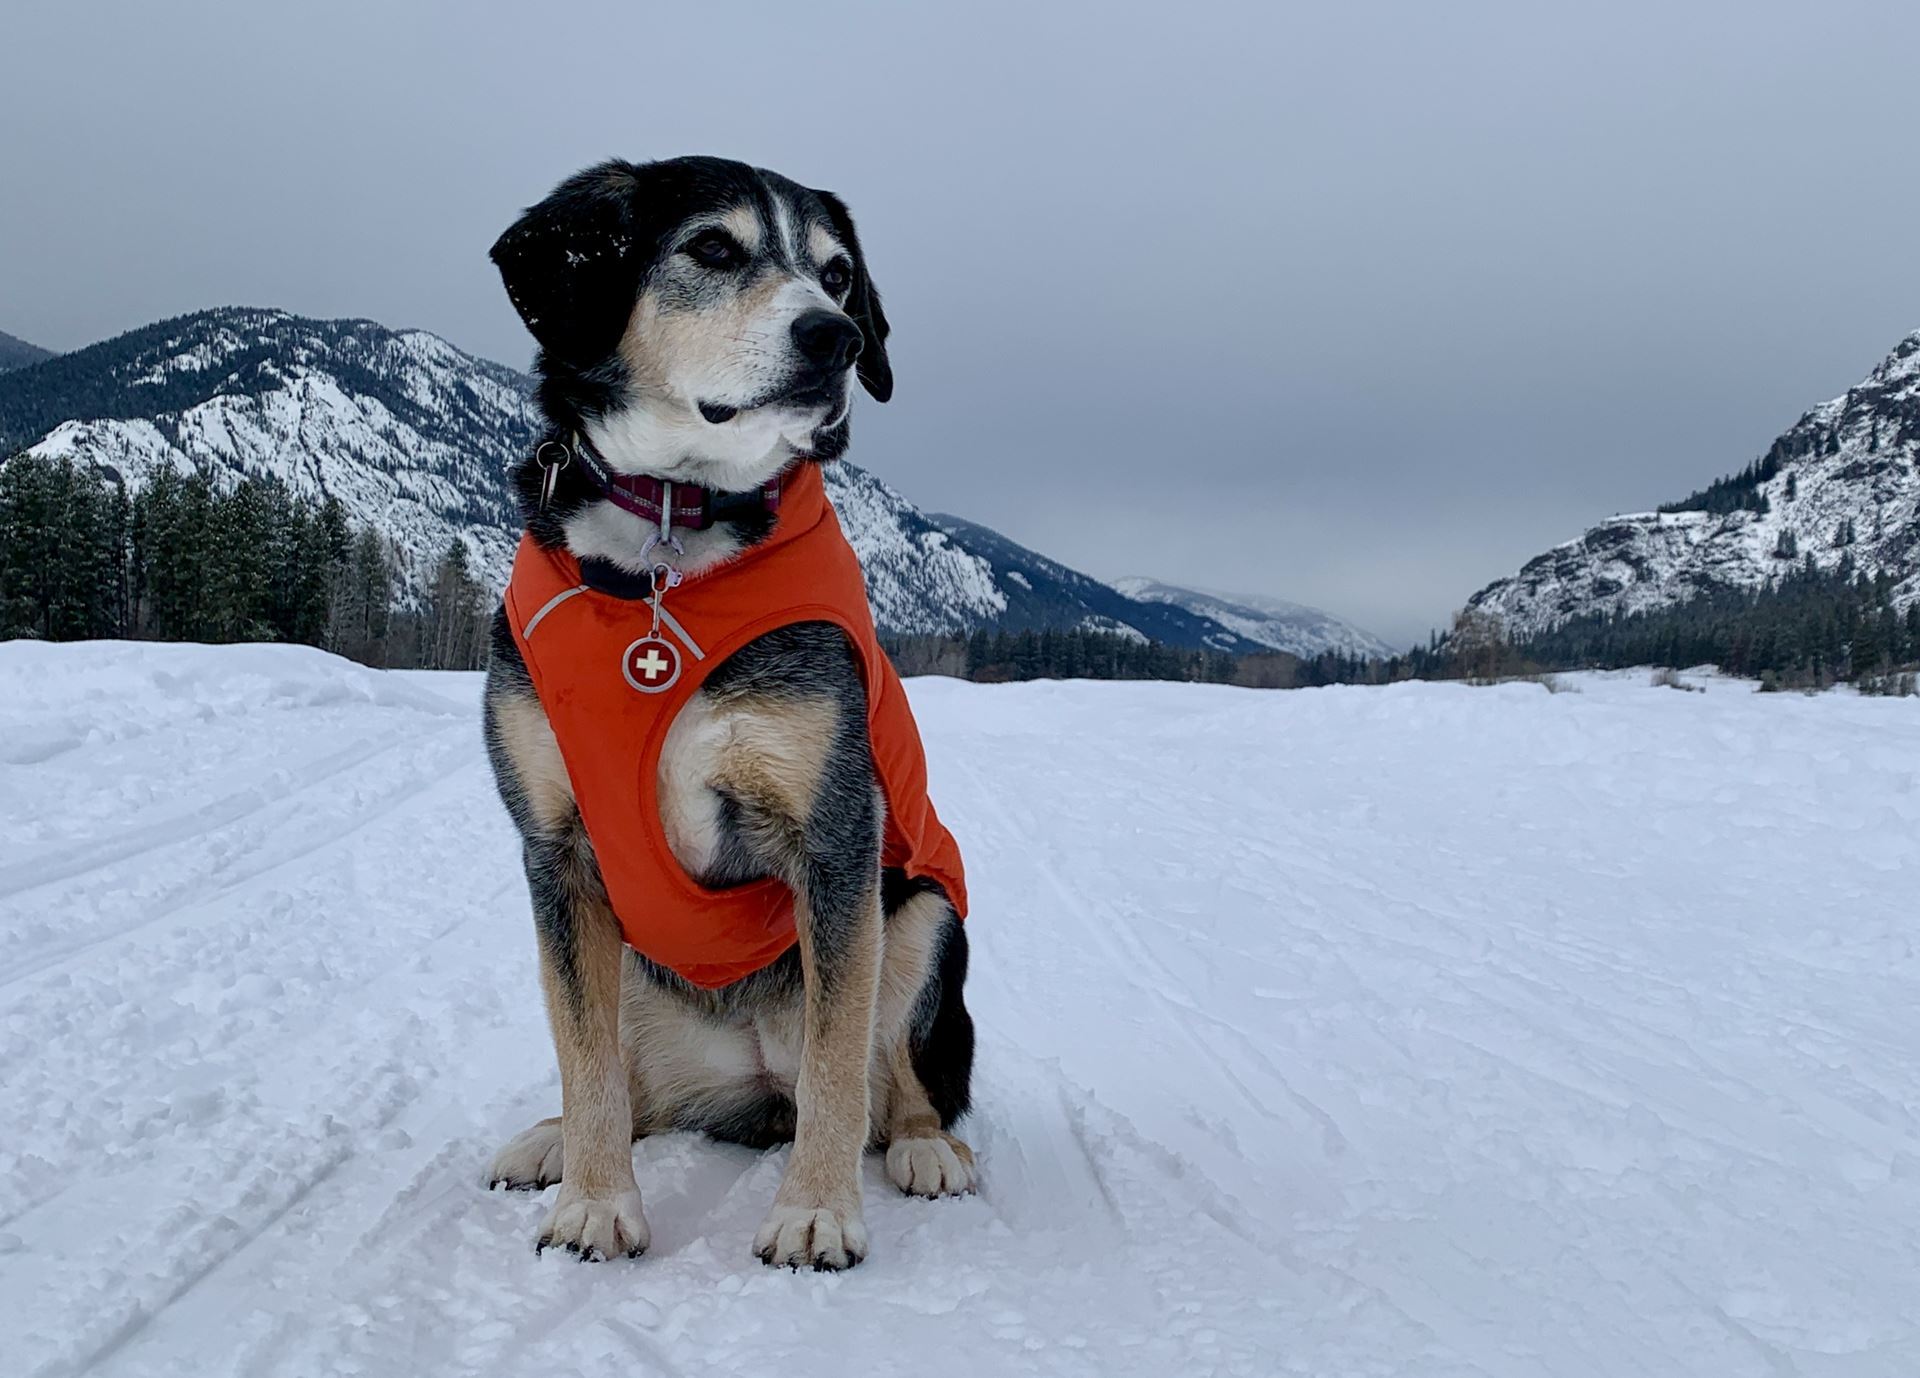 A dog sitting in snow with mountains in the background